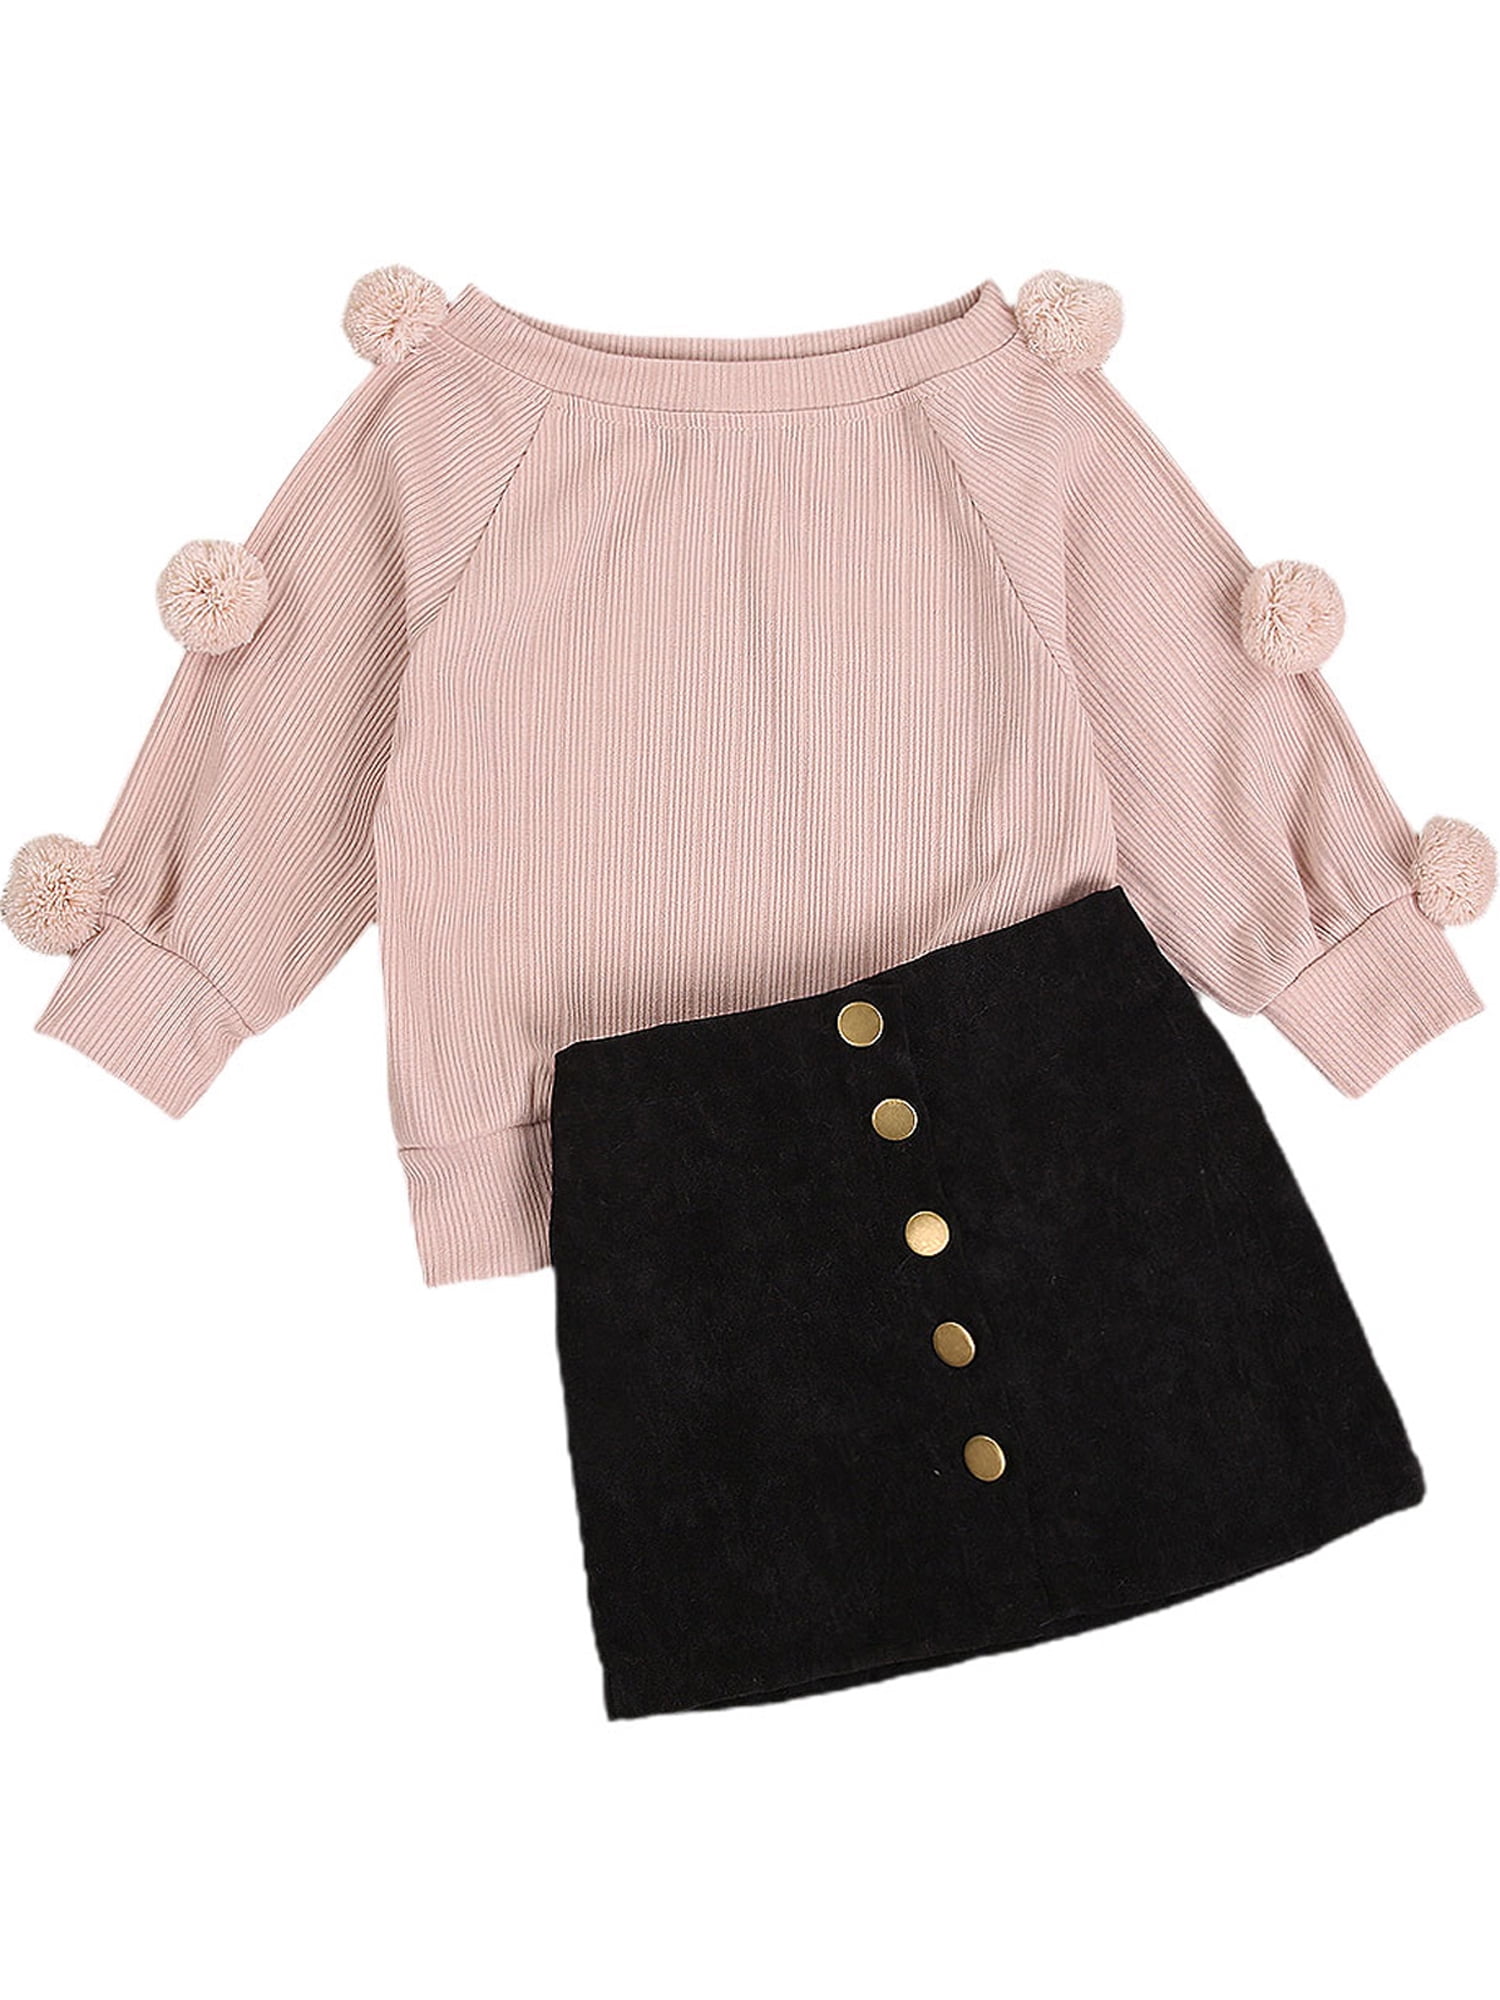 Toddler Kid Baby Girl Fall Winter Clothes Long Sleeve Knitted Sweater Shirt Top Warm Skirt Outfits 2pcs Set